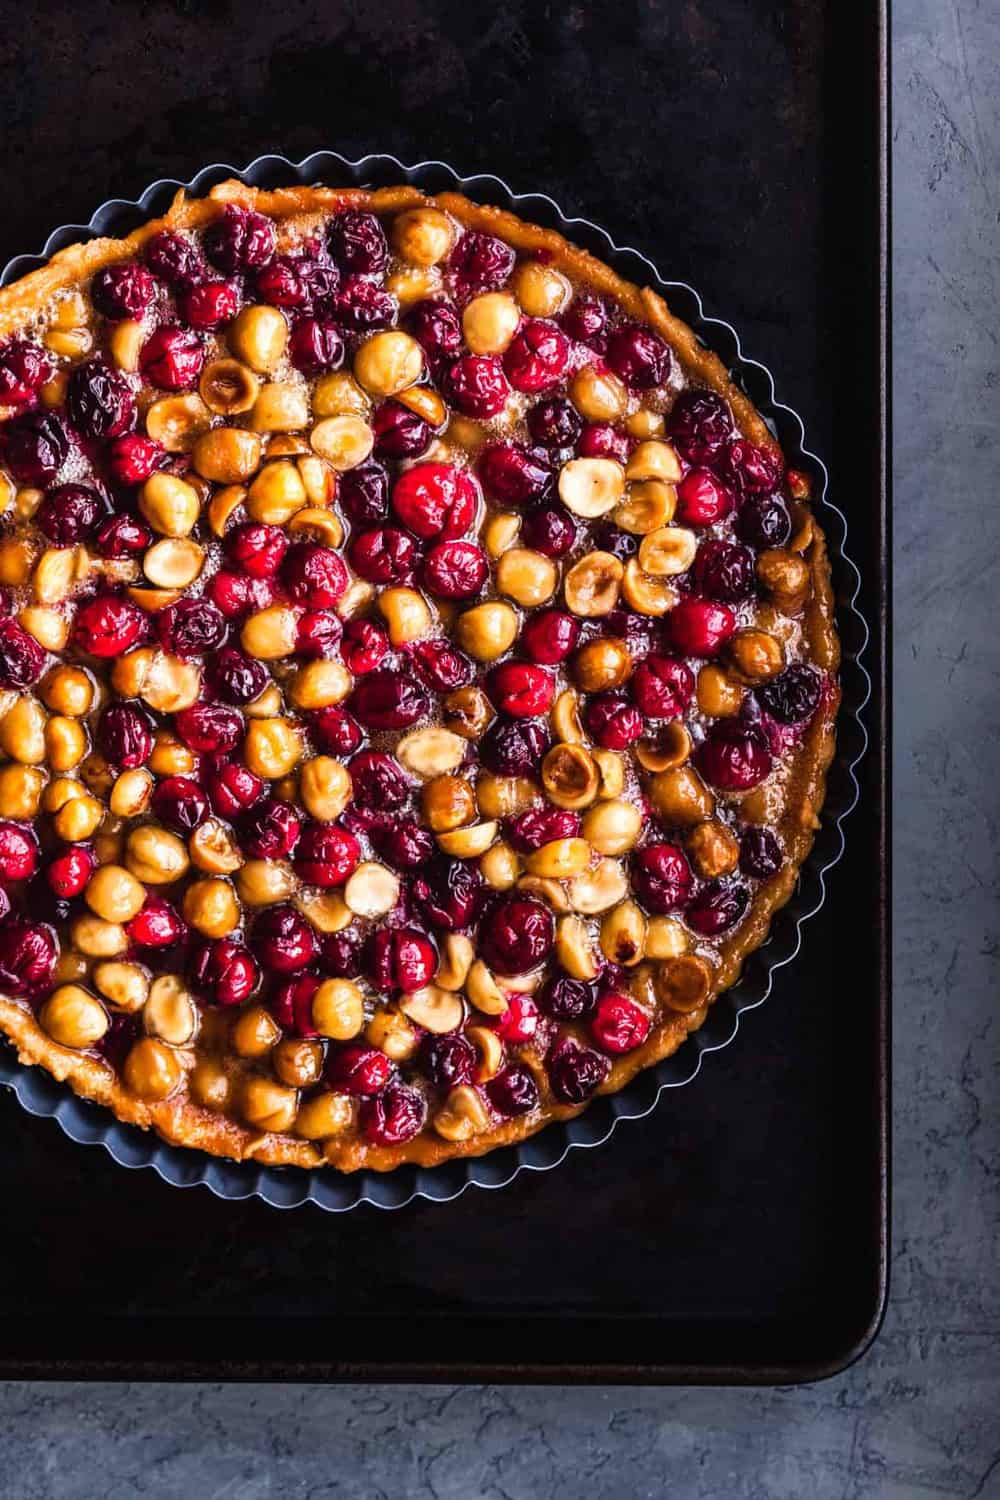 Candied Macadamia, Cranberry & Caramel Tart on a sheet pan, over head, on black surface, with the right side cut off.